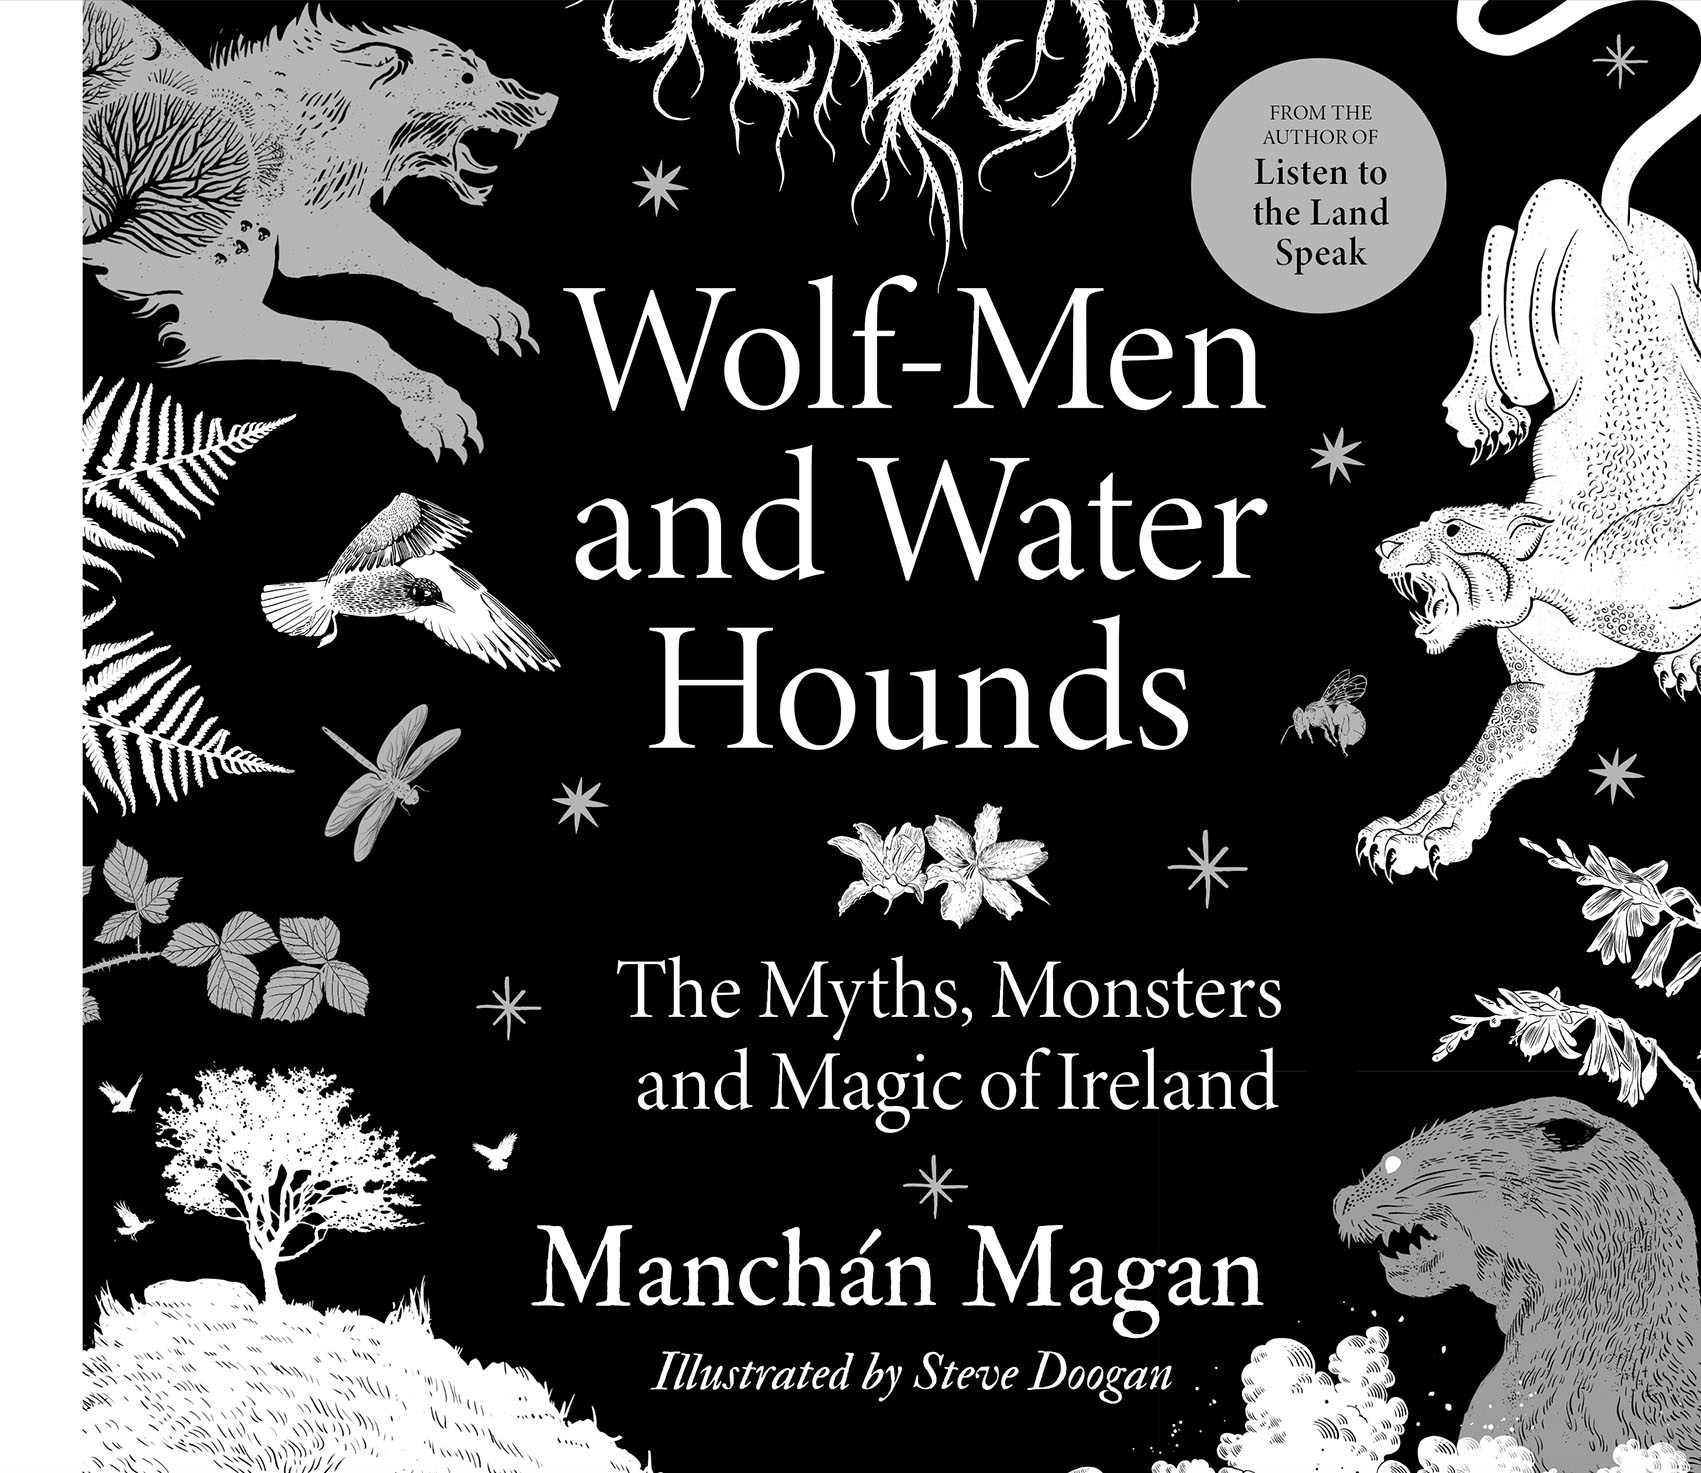 Wolf-Men and Water Hounds: The Myths, Monsters and Magic of Ireland | Manchán Magan | Charlie Byrne's